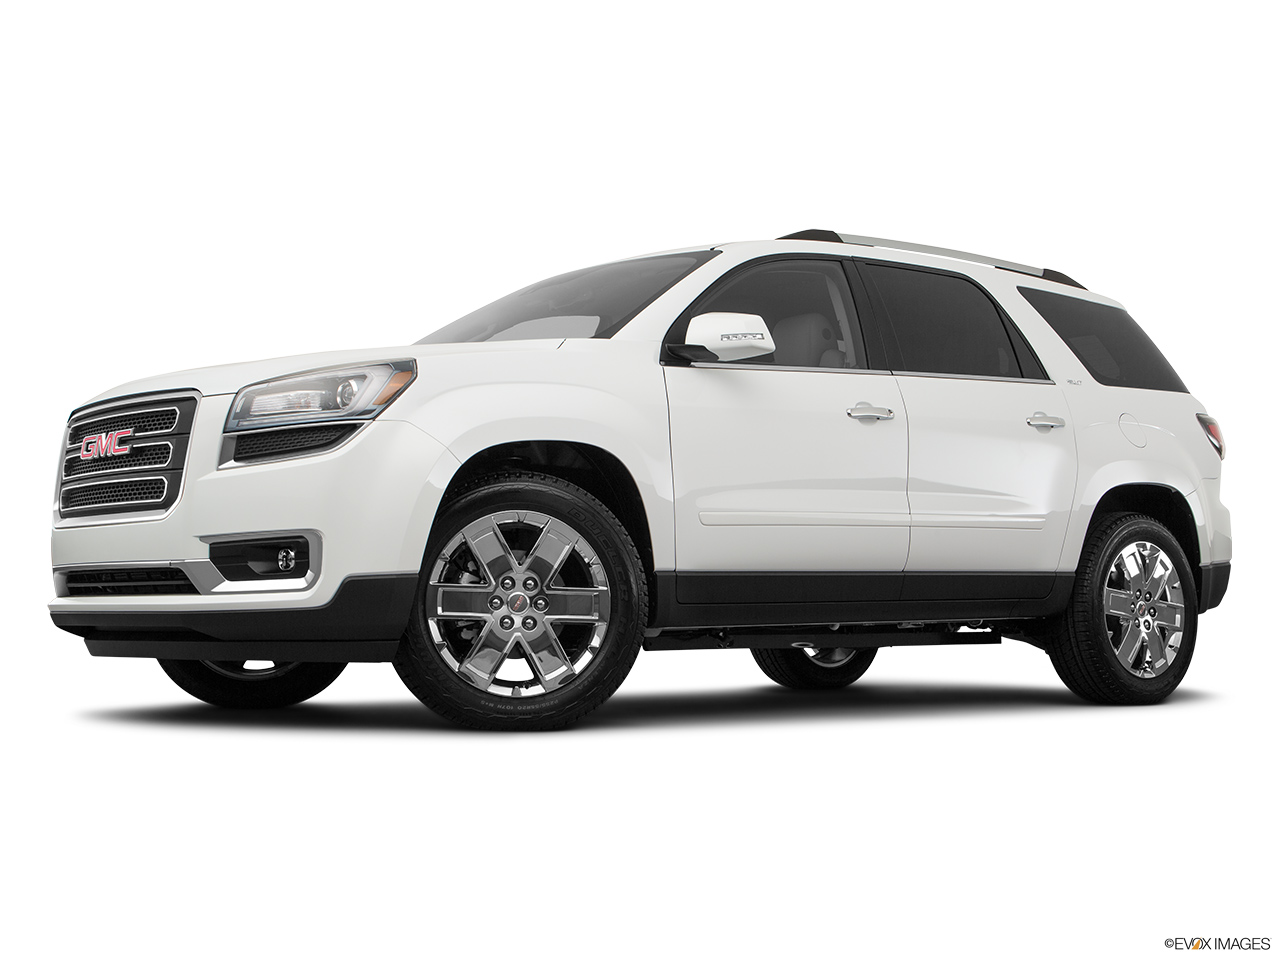 2017 GMC Acadia Limited SLT Low/wide front 5/8. 